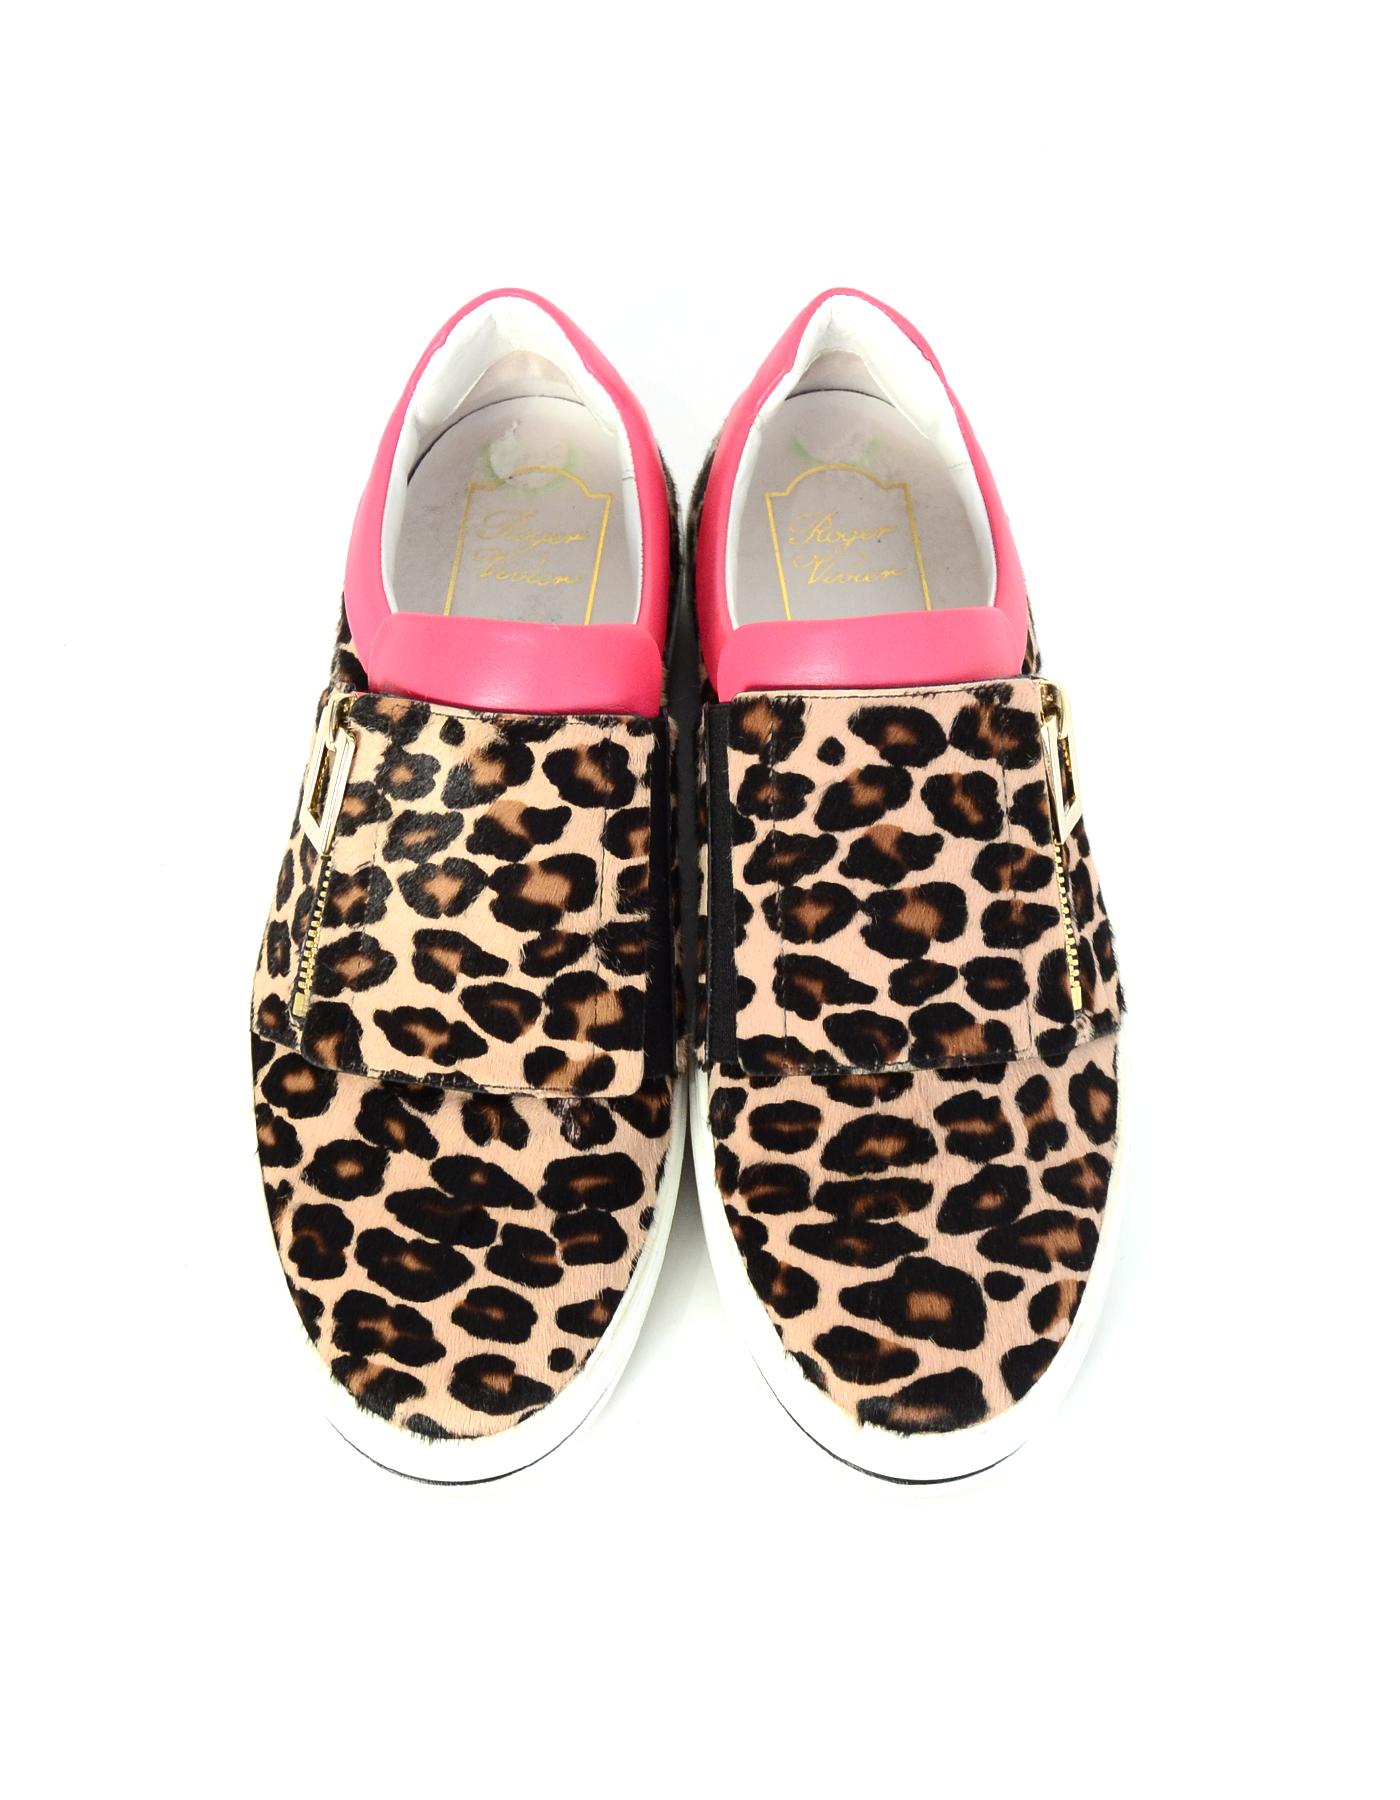 Roger Vivier Leopard Print Sneaky Viv Calf Hair Sneakers sz 38 rt $1, 050 In Good Condition In New York, NY